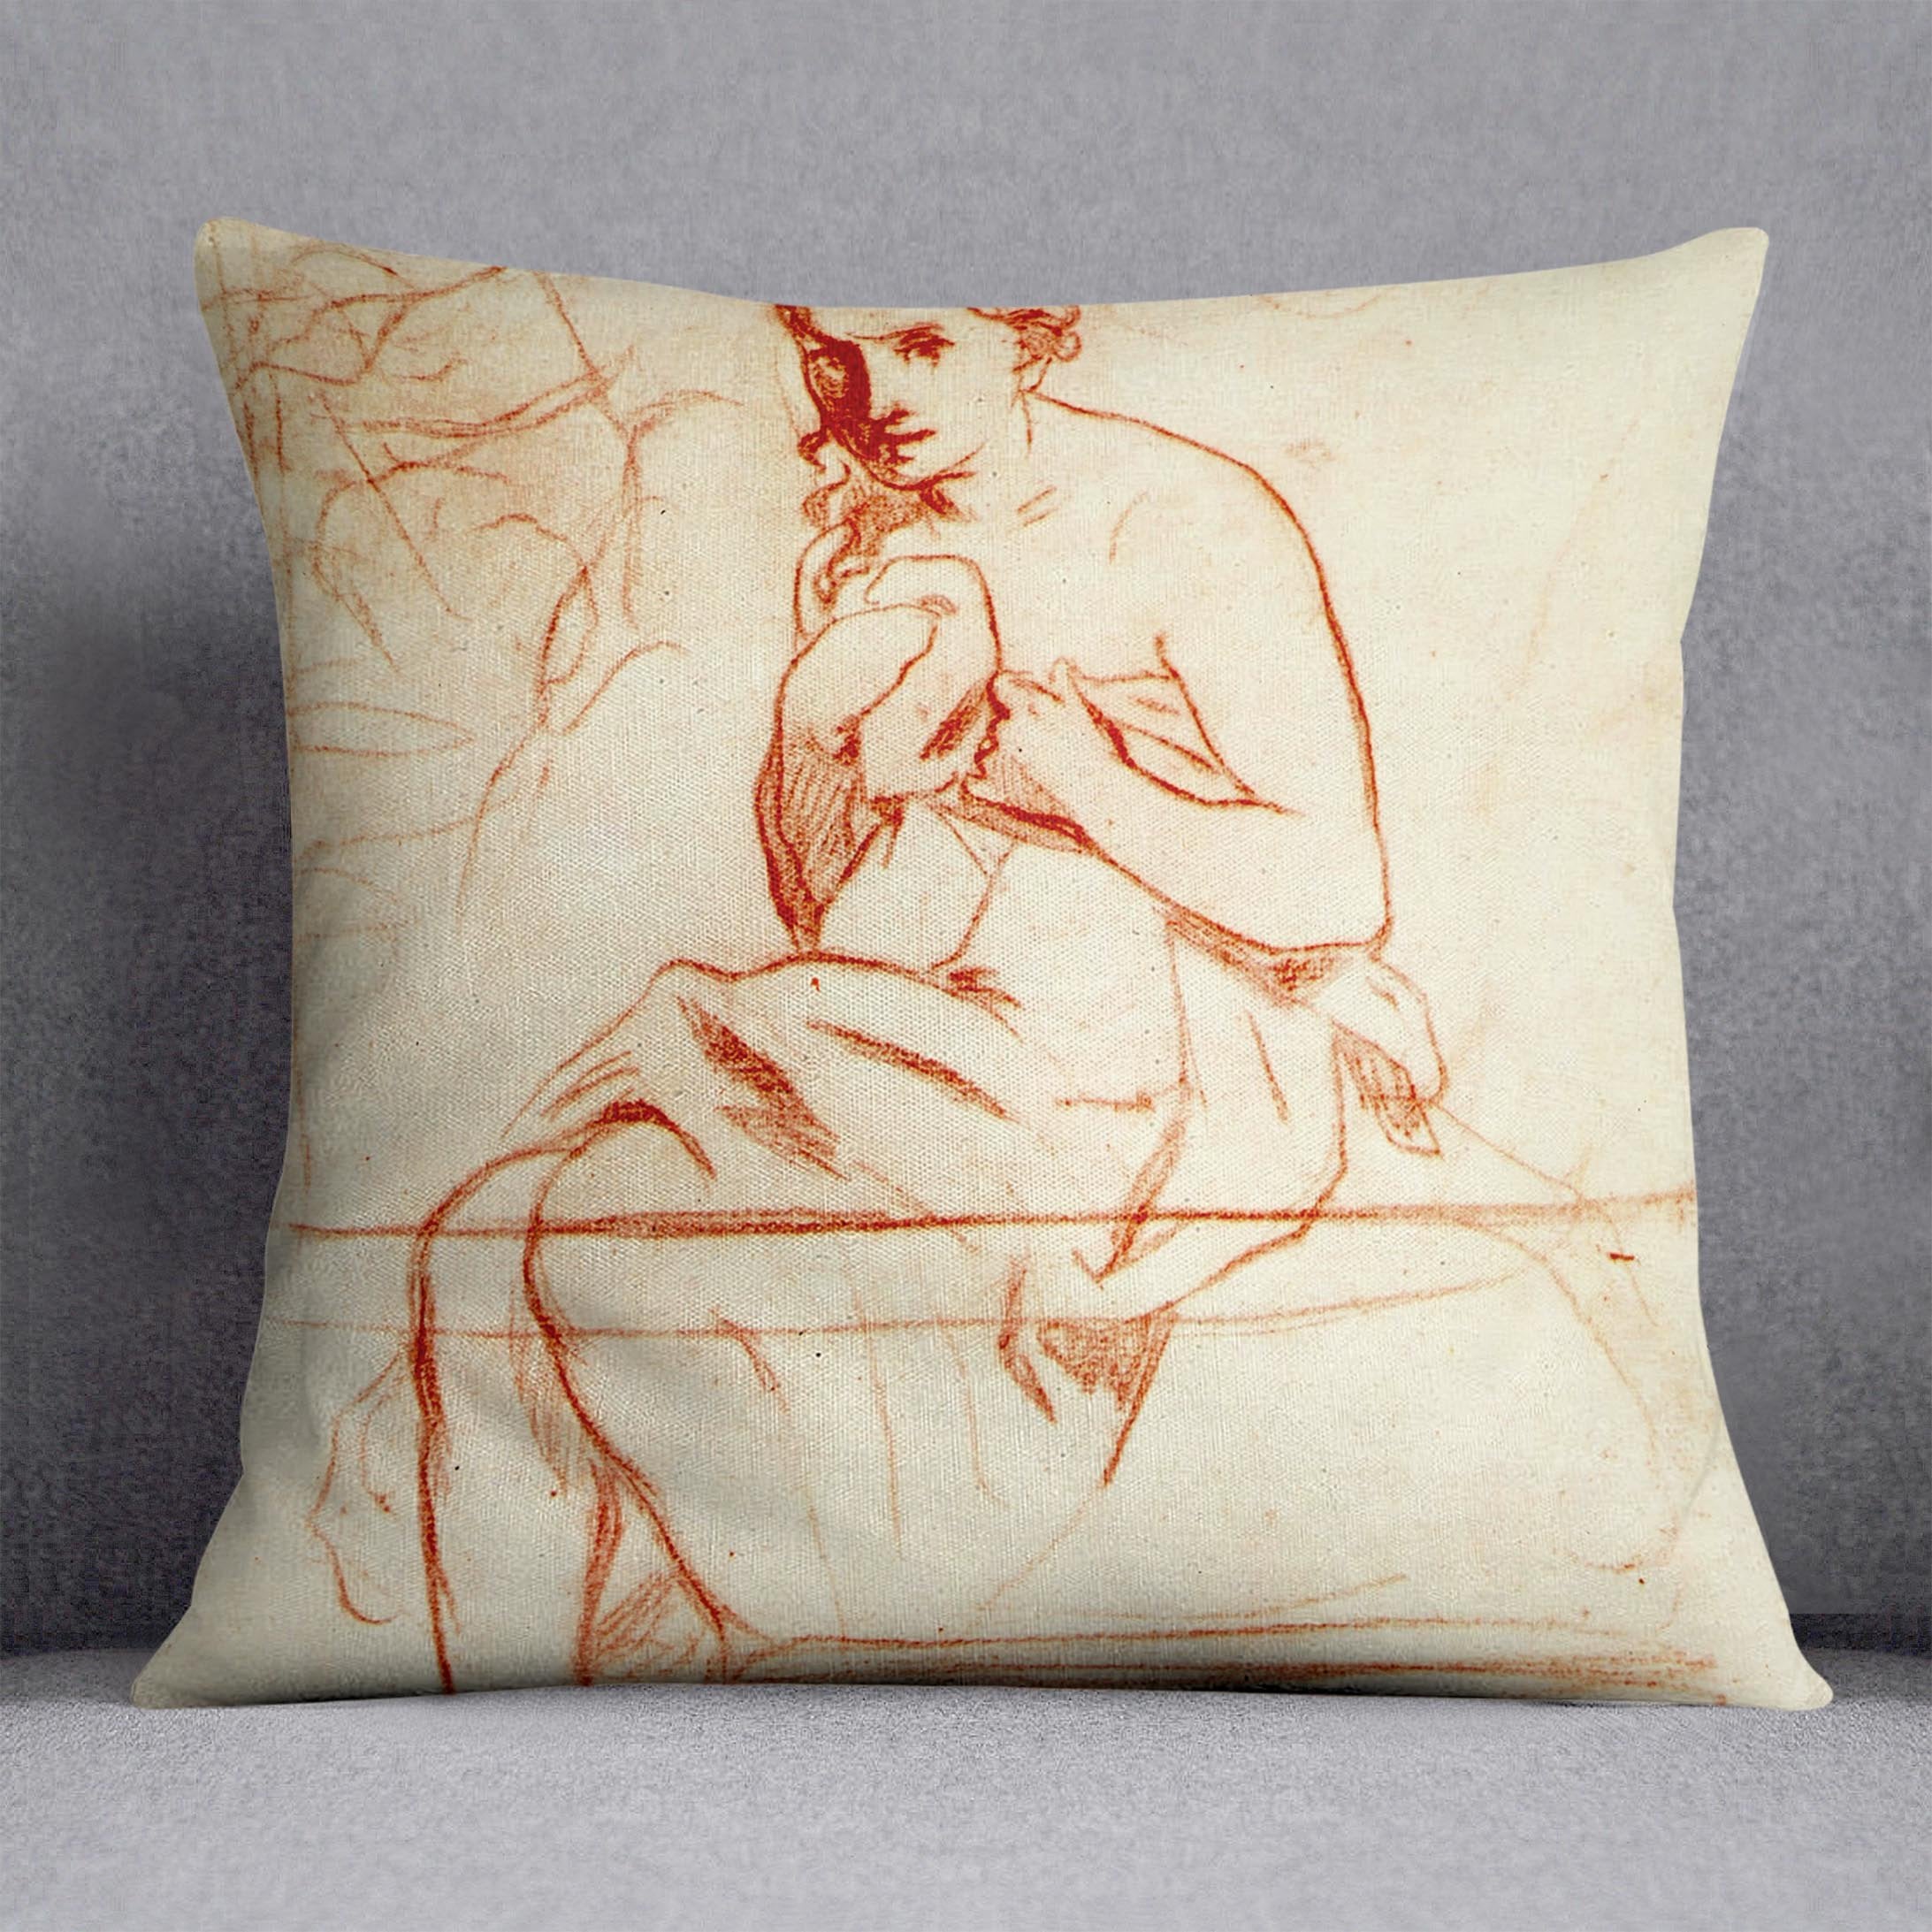 Women at the Toilet by Manet Throw Pillow